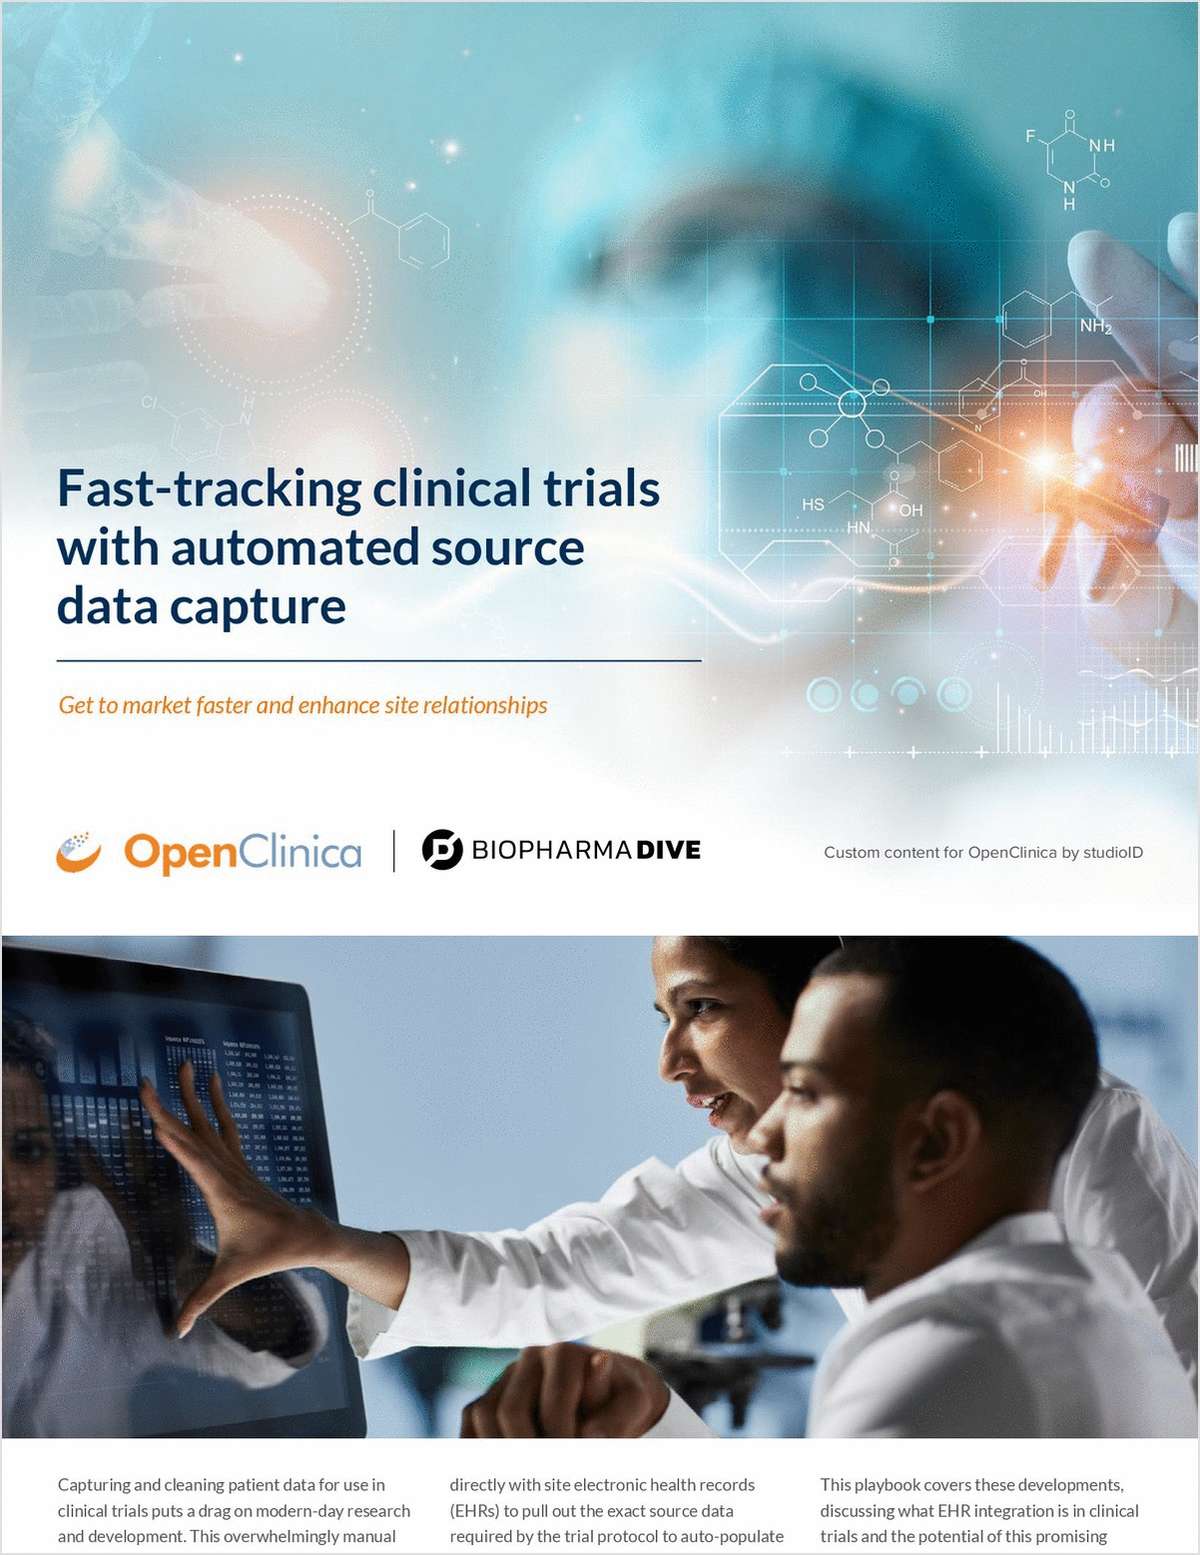 Bridging the Data-Capture Gap to Fast Track Clinical Trials